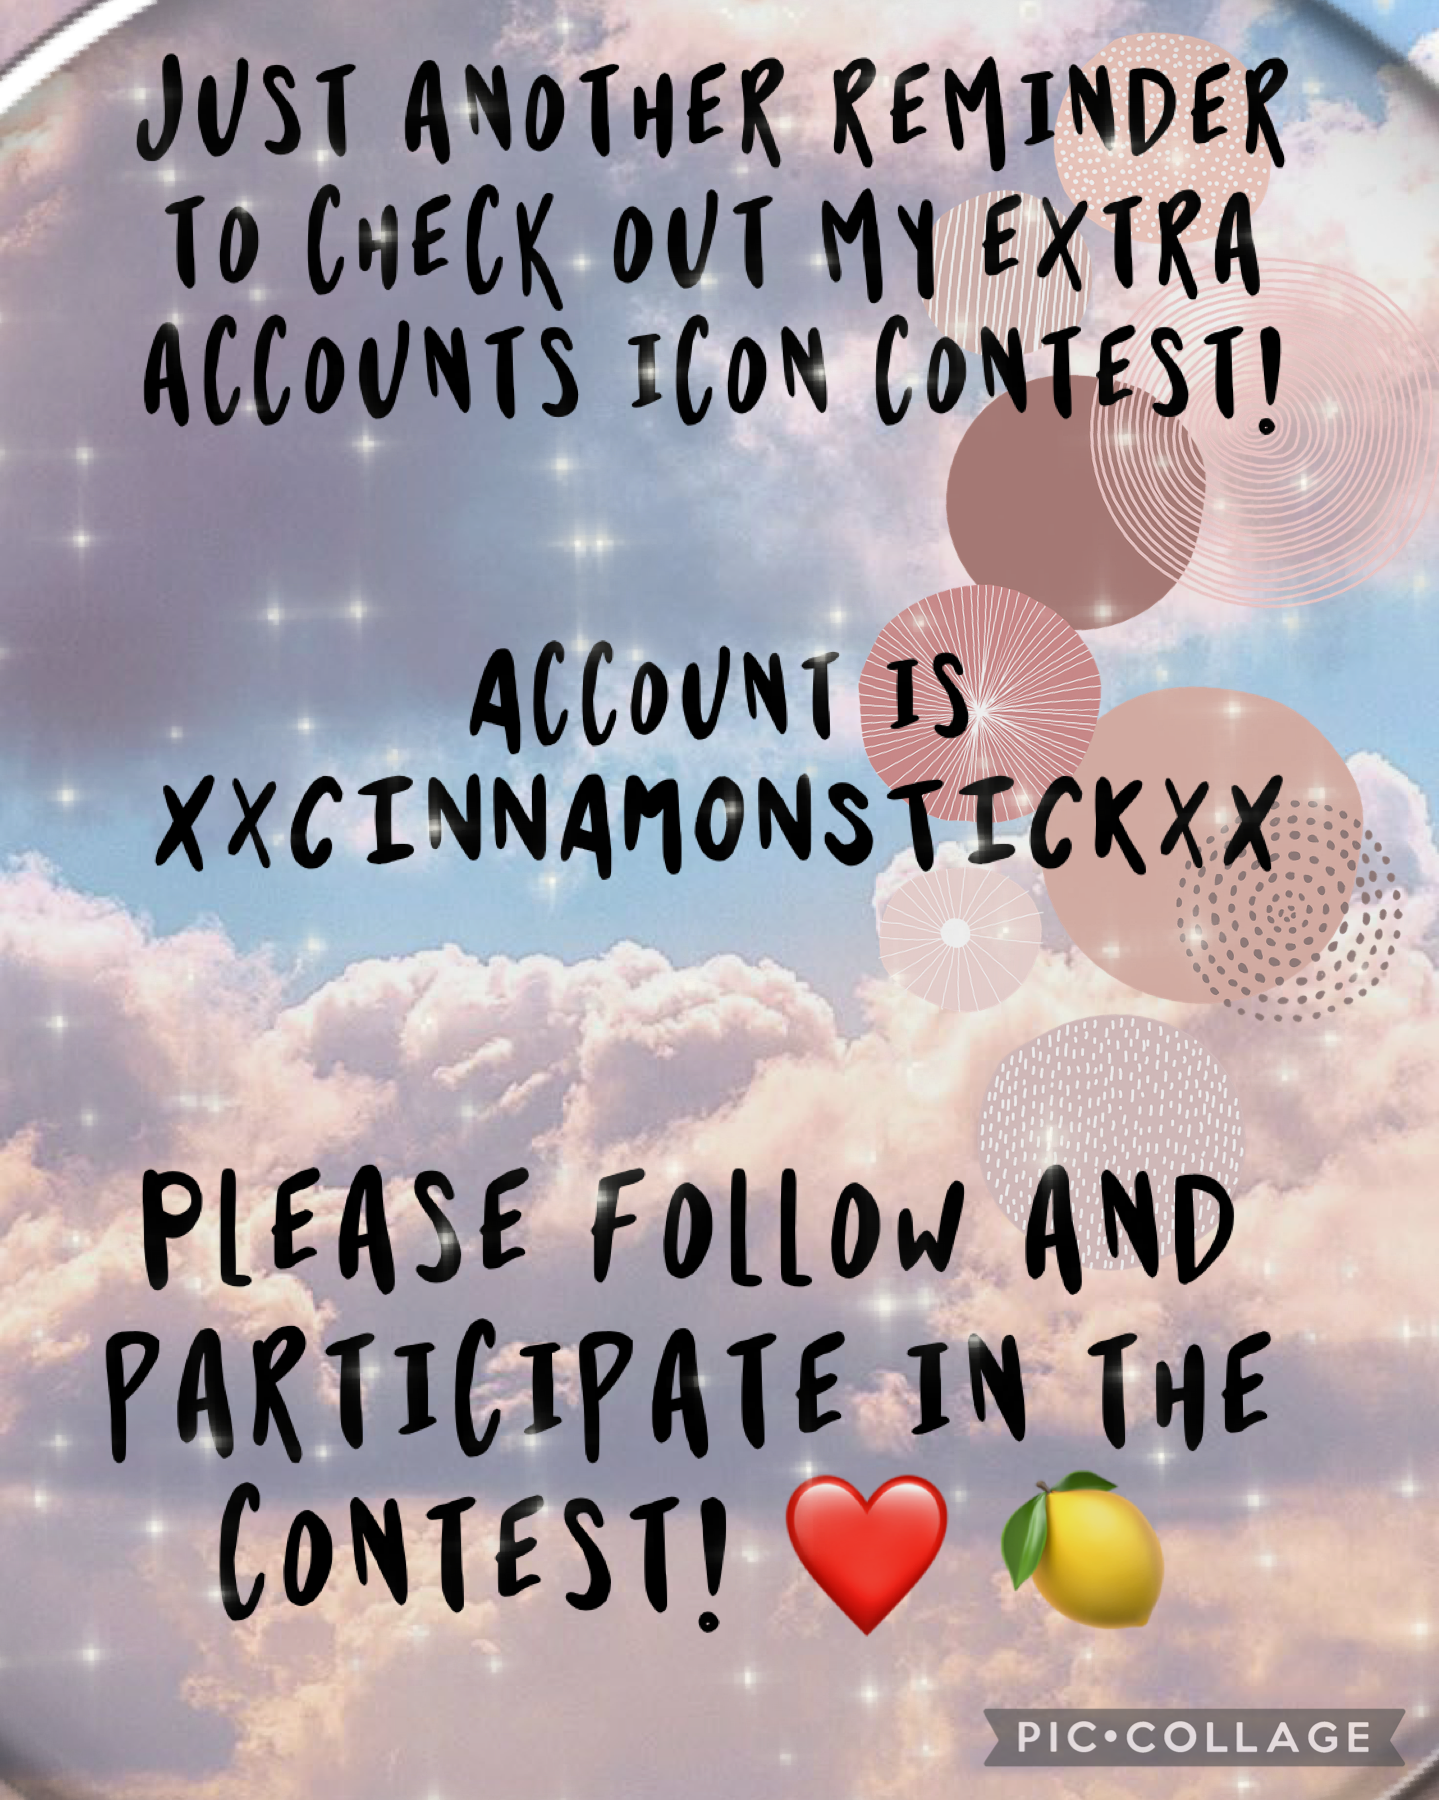 I really need more people to participate. Any icon design is acceptable, I have no preferences. ❤️ 🍋 